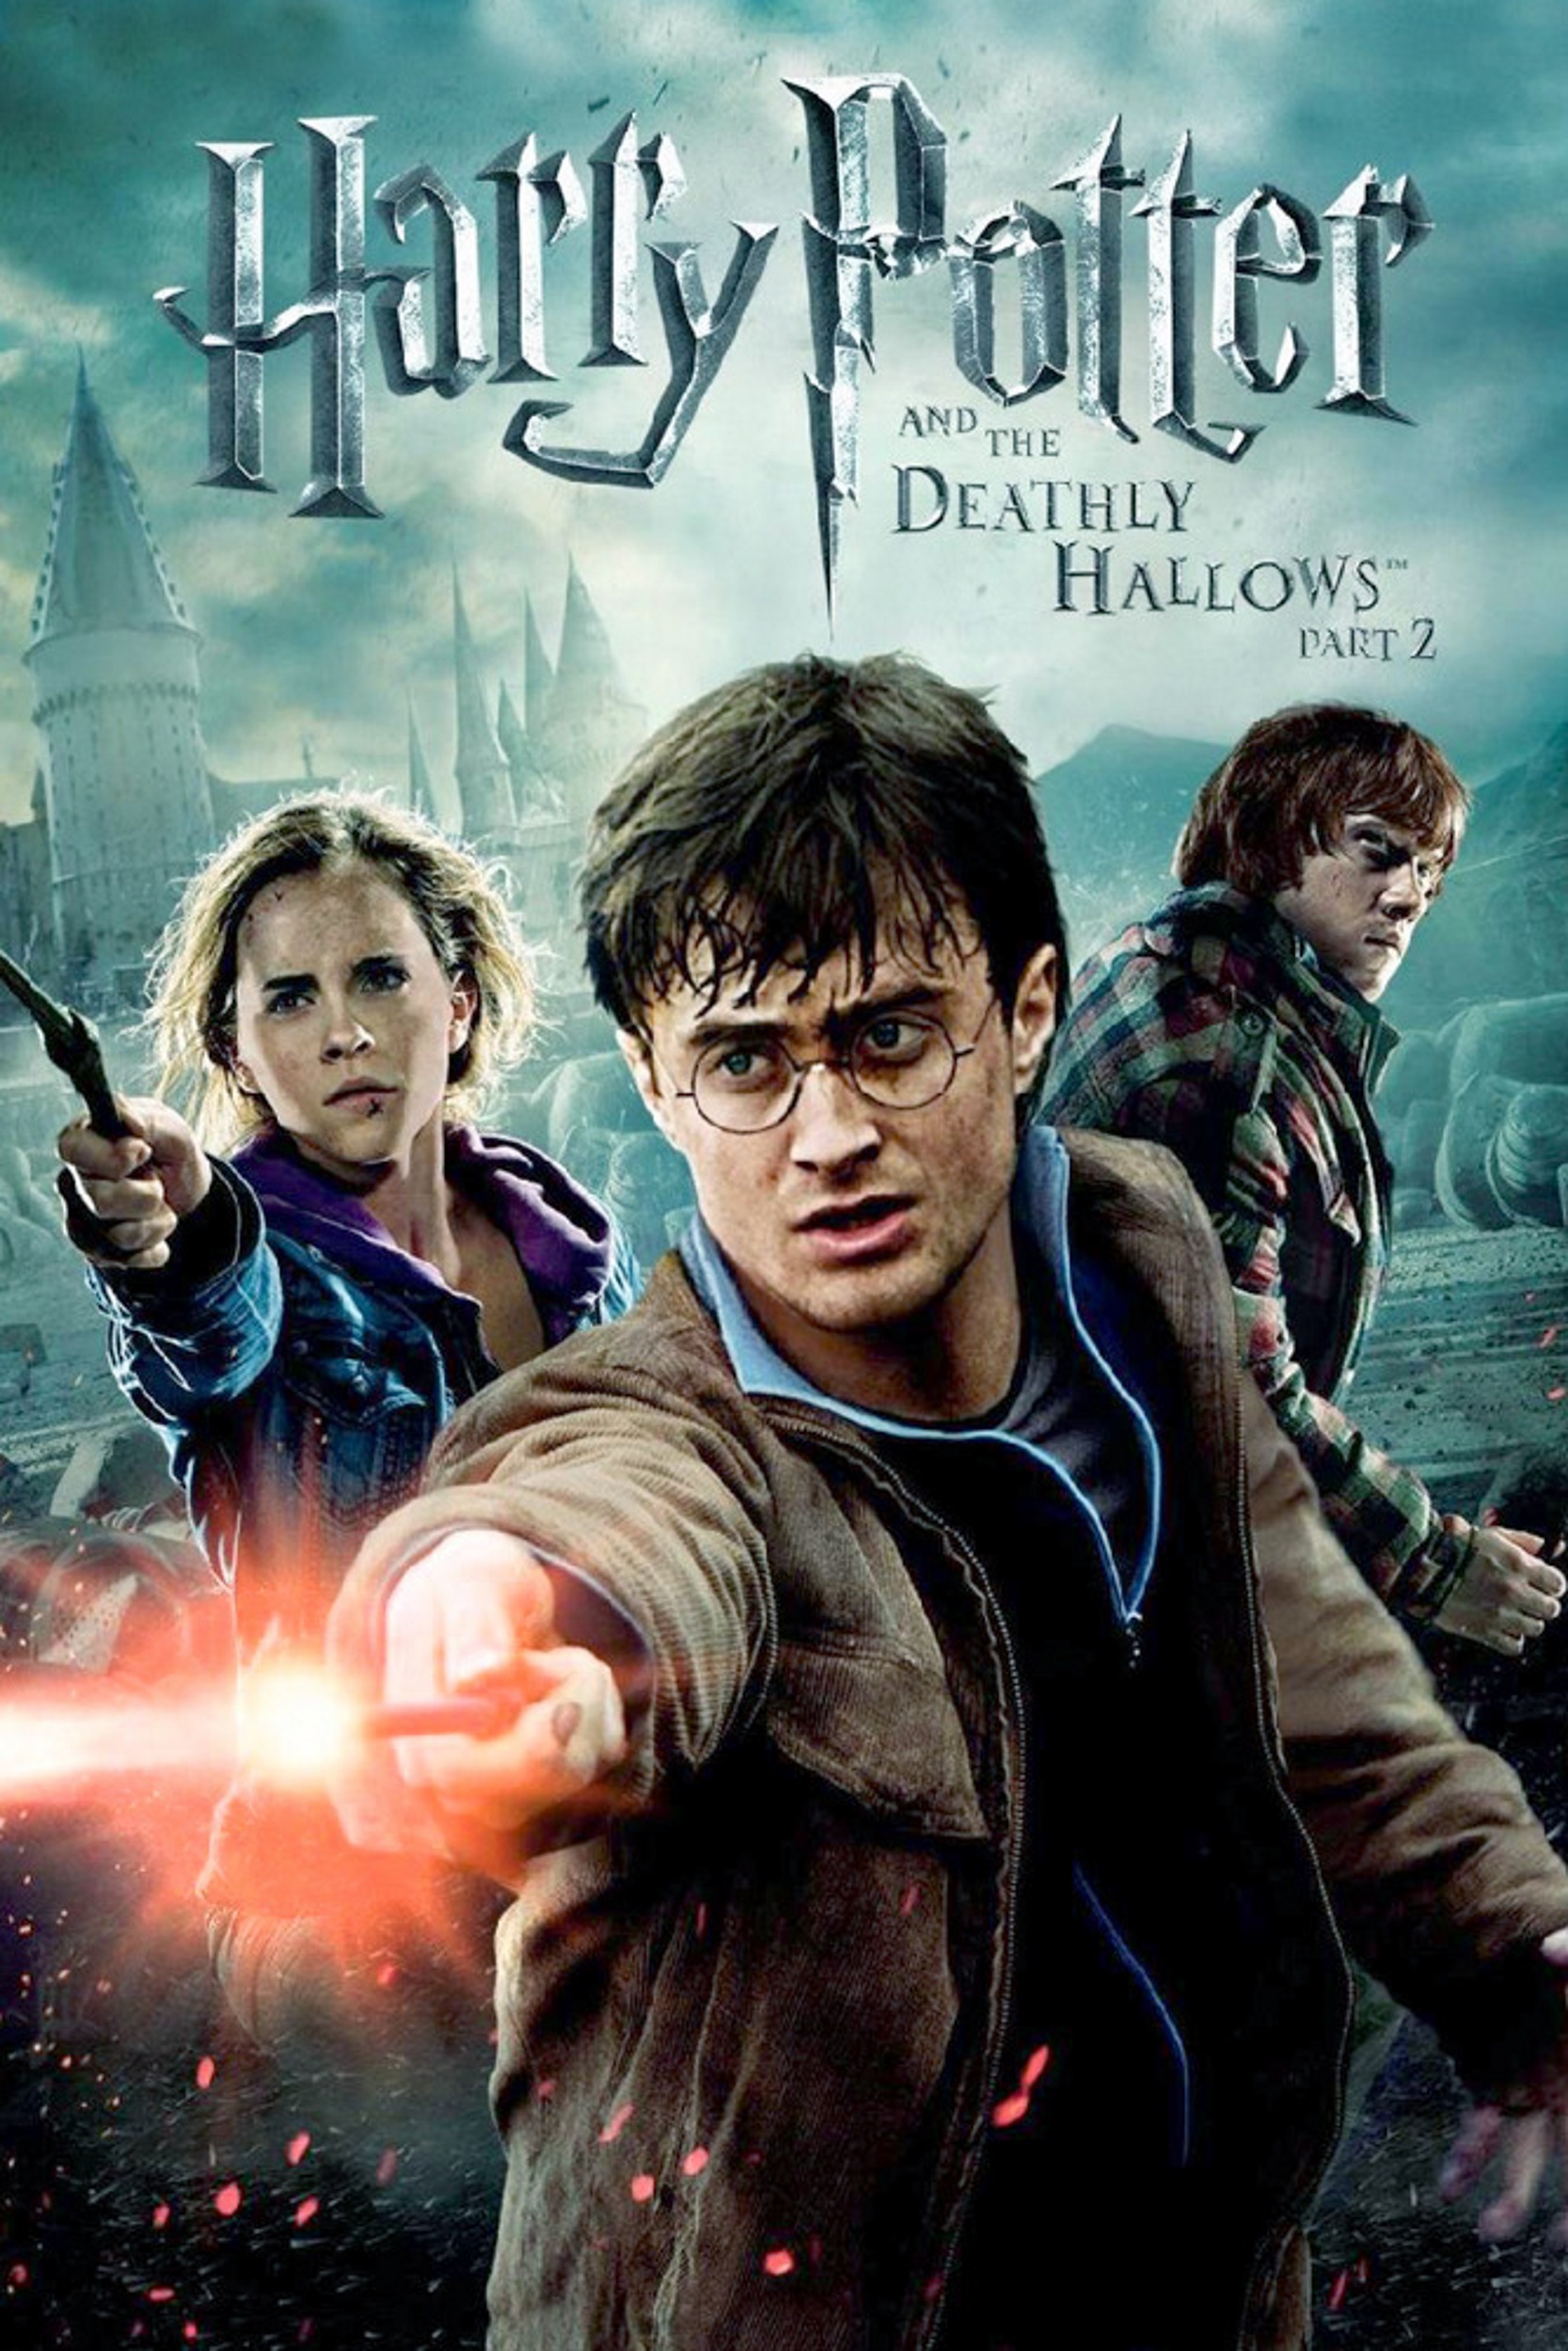 Harry Potter Deathly Hallows Part 2 In Hindi Download 720p